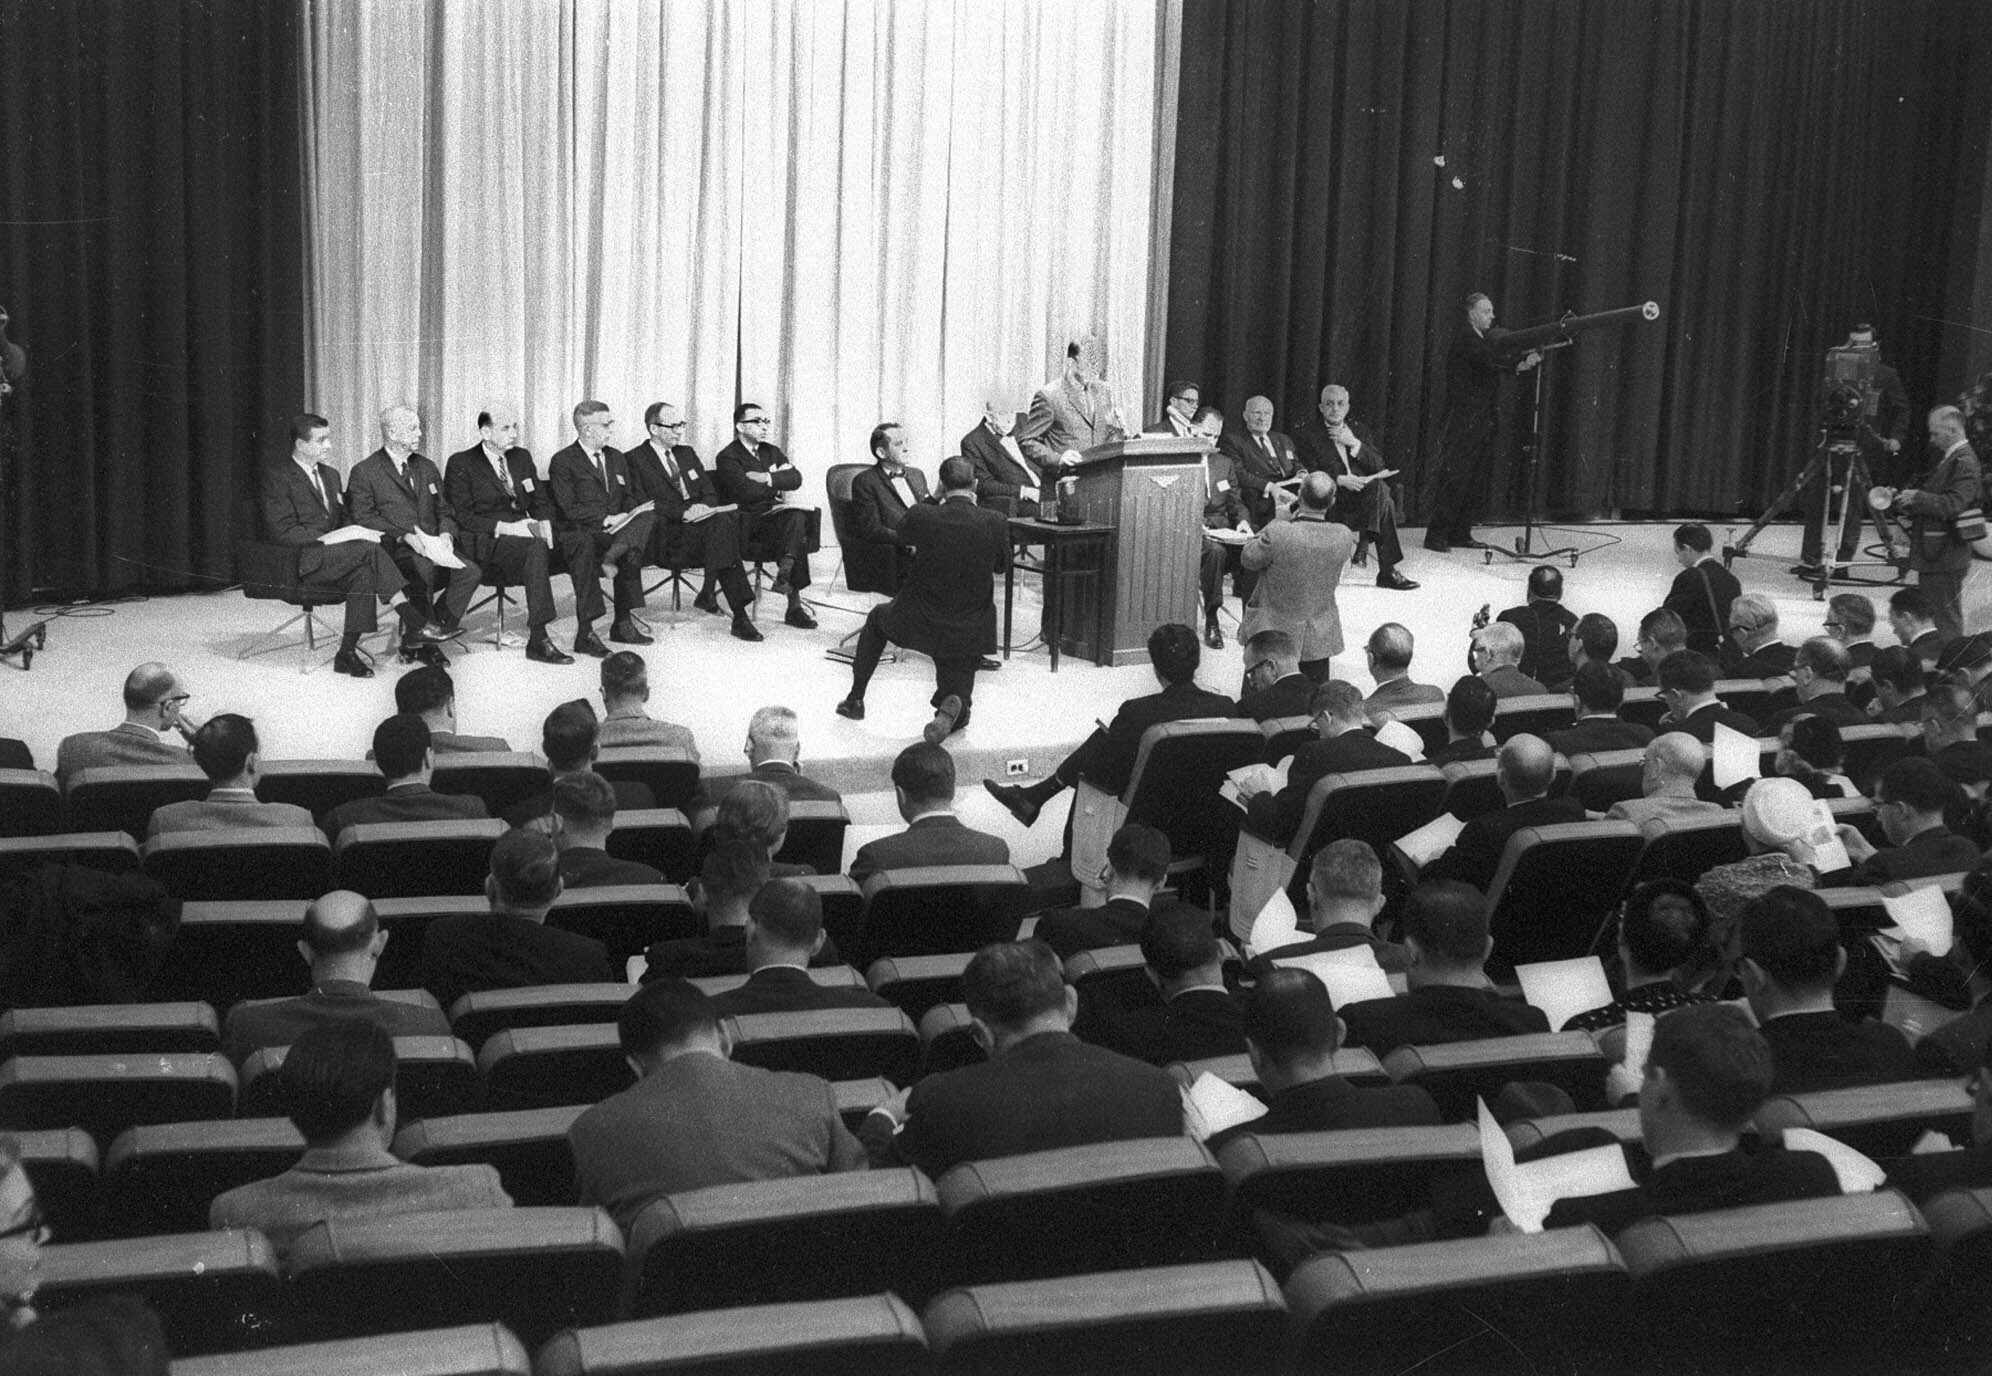 U.S. Surgeon General Luther Terry, at rostrum, answers questions on a landmark report on the dangers of smoking during a Jan. 11, 1964 news conference in Washington.  Members of his advisory committee sit behind him, with Dr. Emmanuel Farber sixth from left, with arms folded (ASSOCIATED PRESS—ASSOCIATED PRESS)